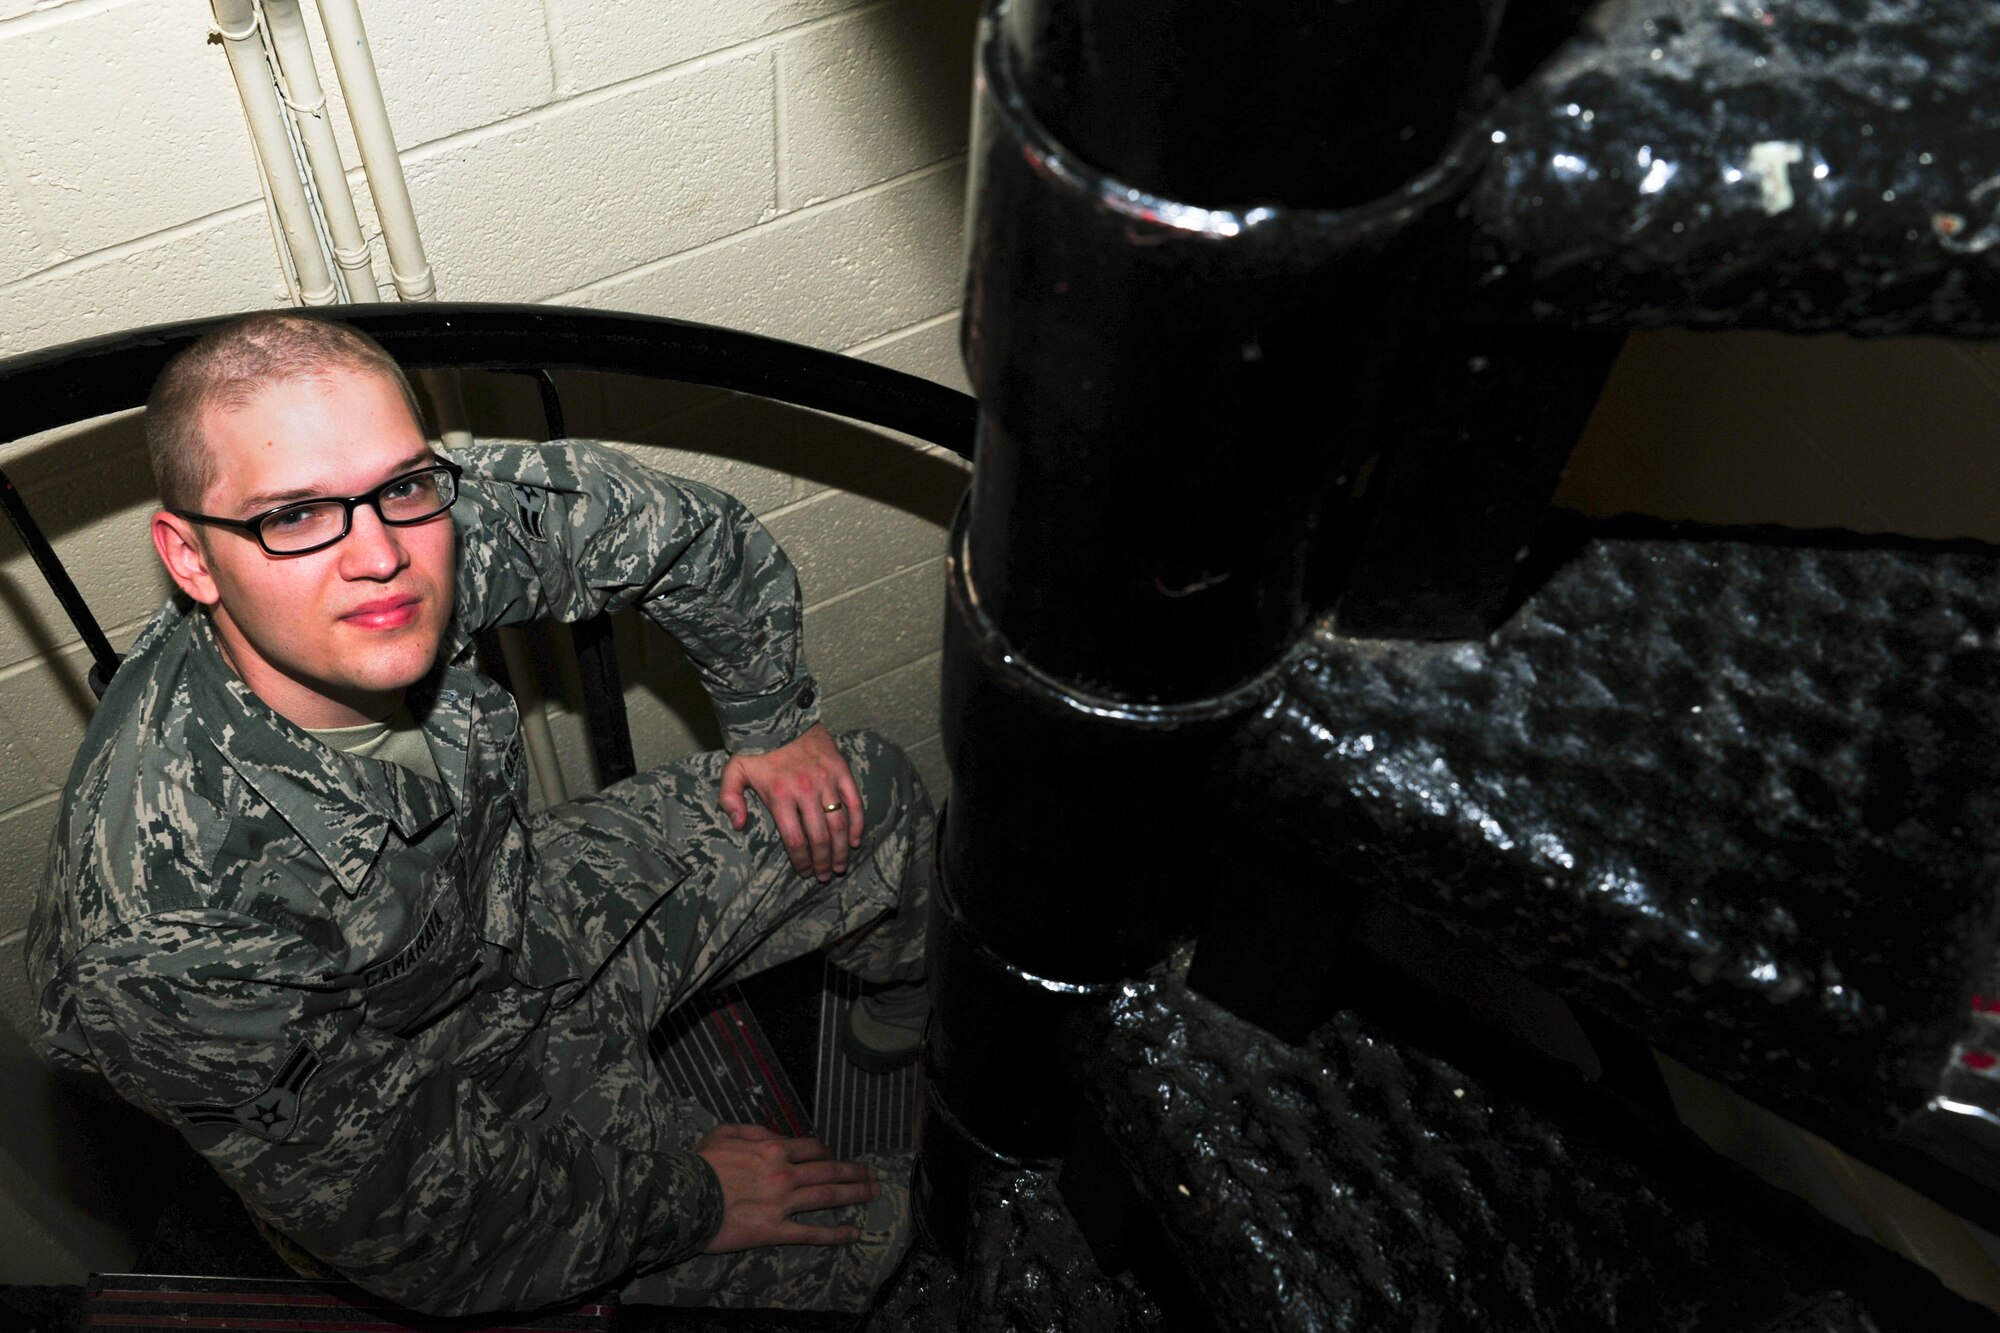 Airman 1st Class Vincent Camarata, 42nd Operation Support Squadron air traffic controller apprentice, takes a seat on one of the many stairs that lead up to the top of the air traffic control tower at Maxwell Air Force Base, Alabama, Dec. 2, 2014. Camarata climbs eight flights of stairs to reach the top of the tower every day. (U.S. Air Force photo by Airman 1st Class Alexa Culbert/Cleared)